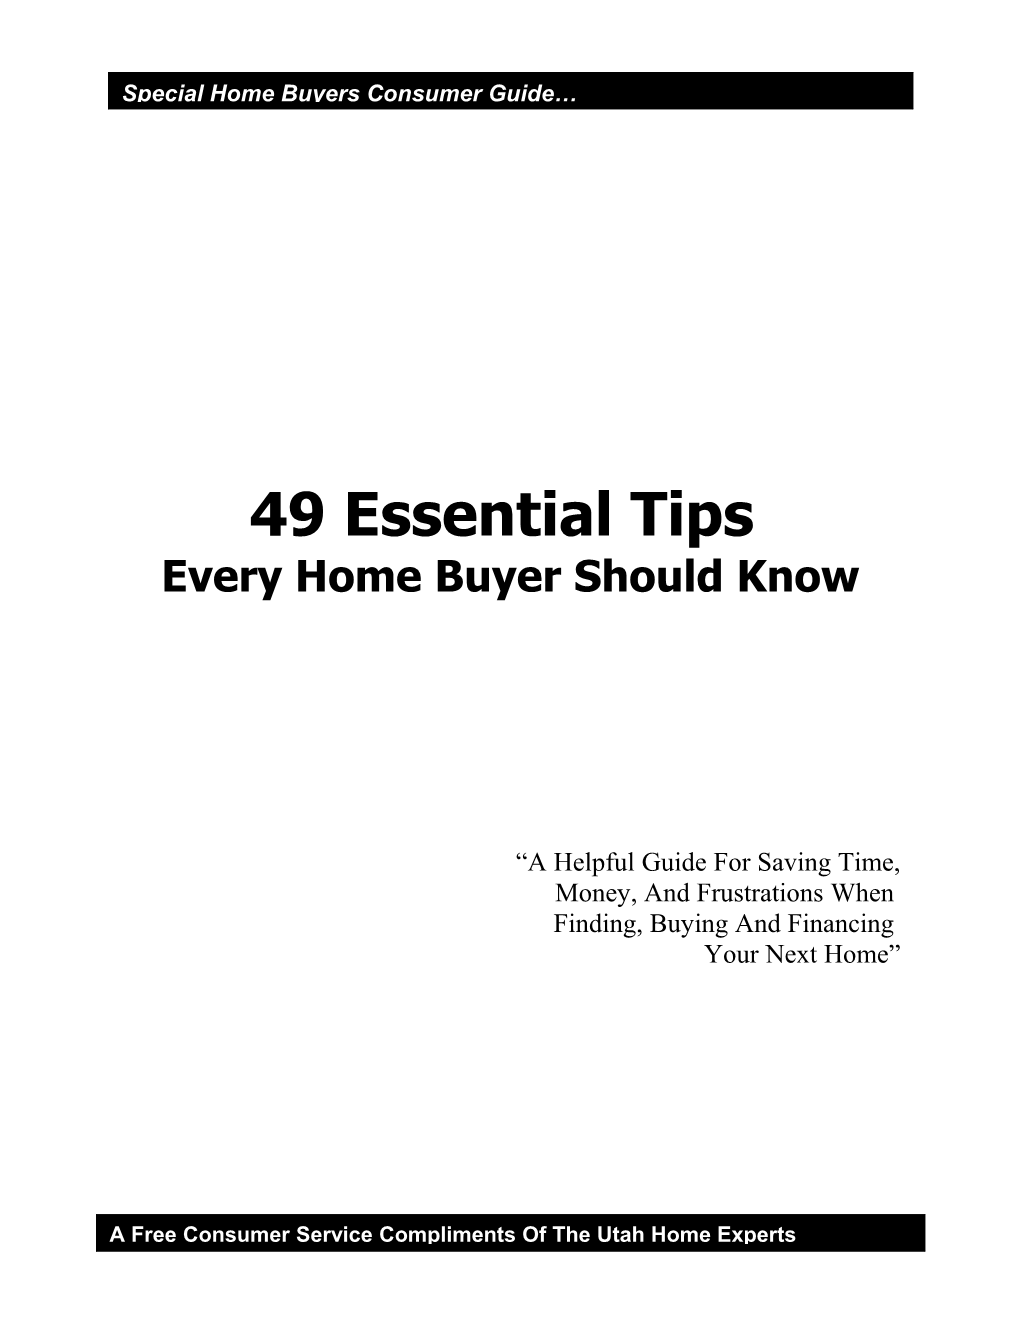 49 Essential Tips Every Home Buyer Should Know a Helpful Guide for Saving Time